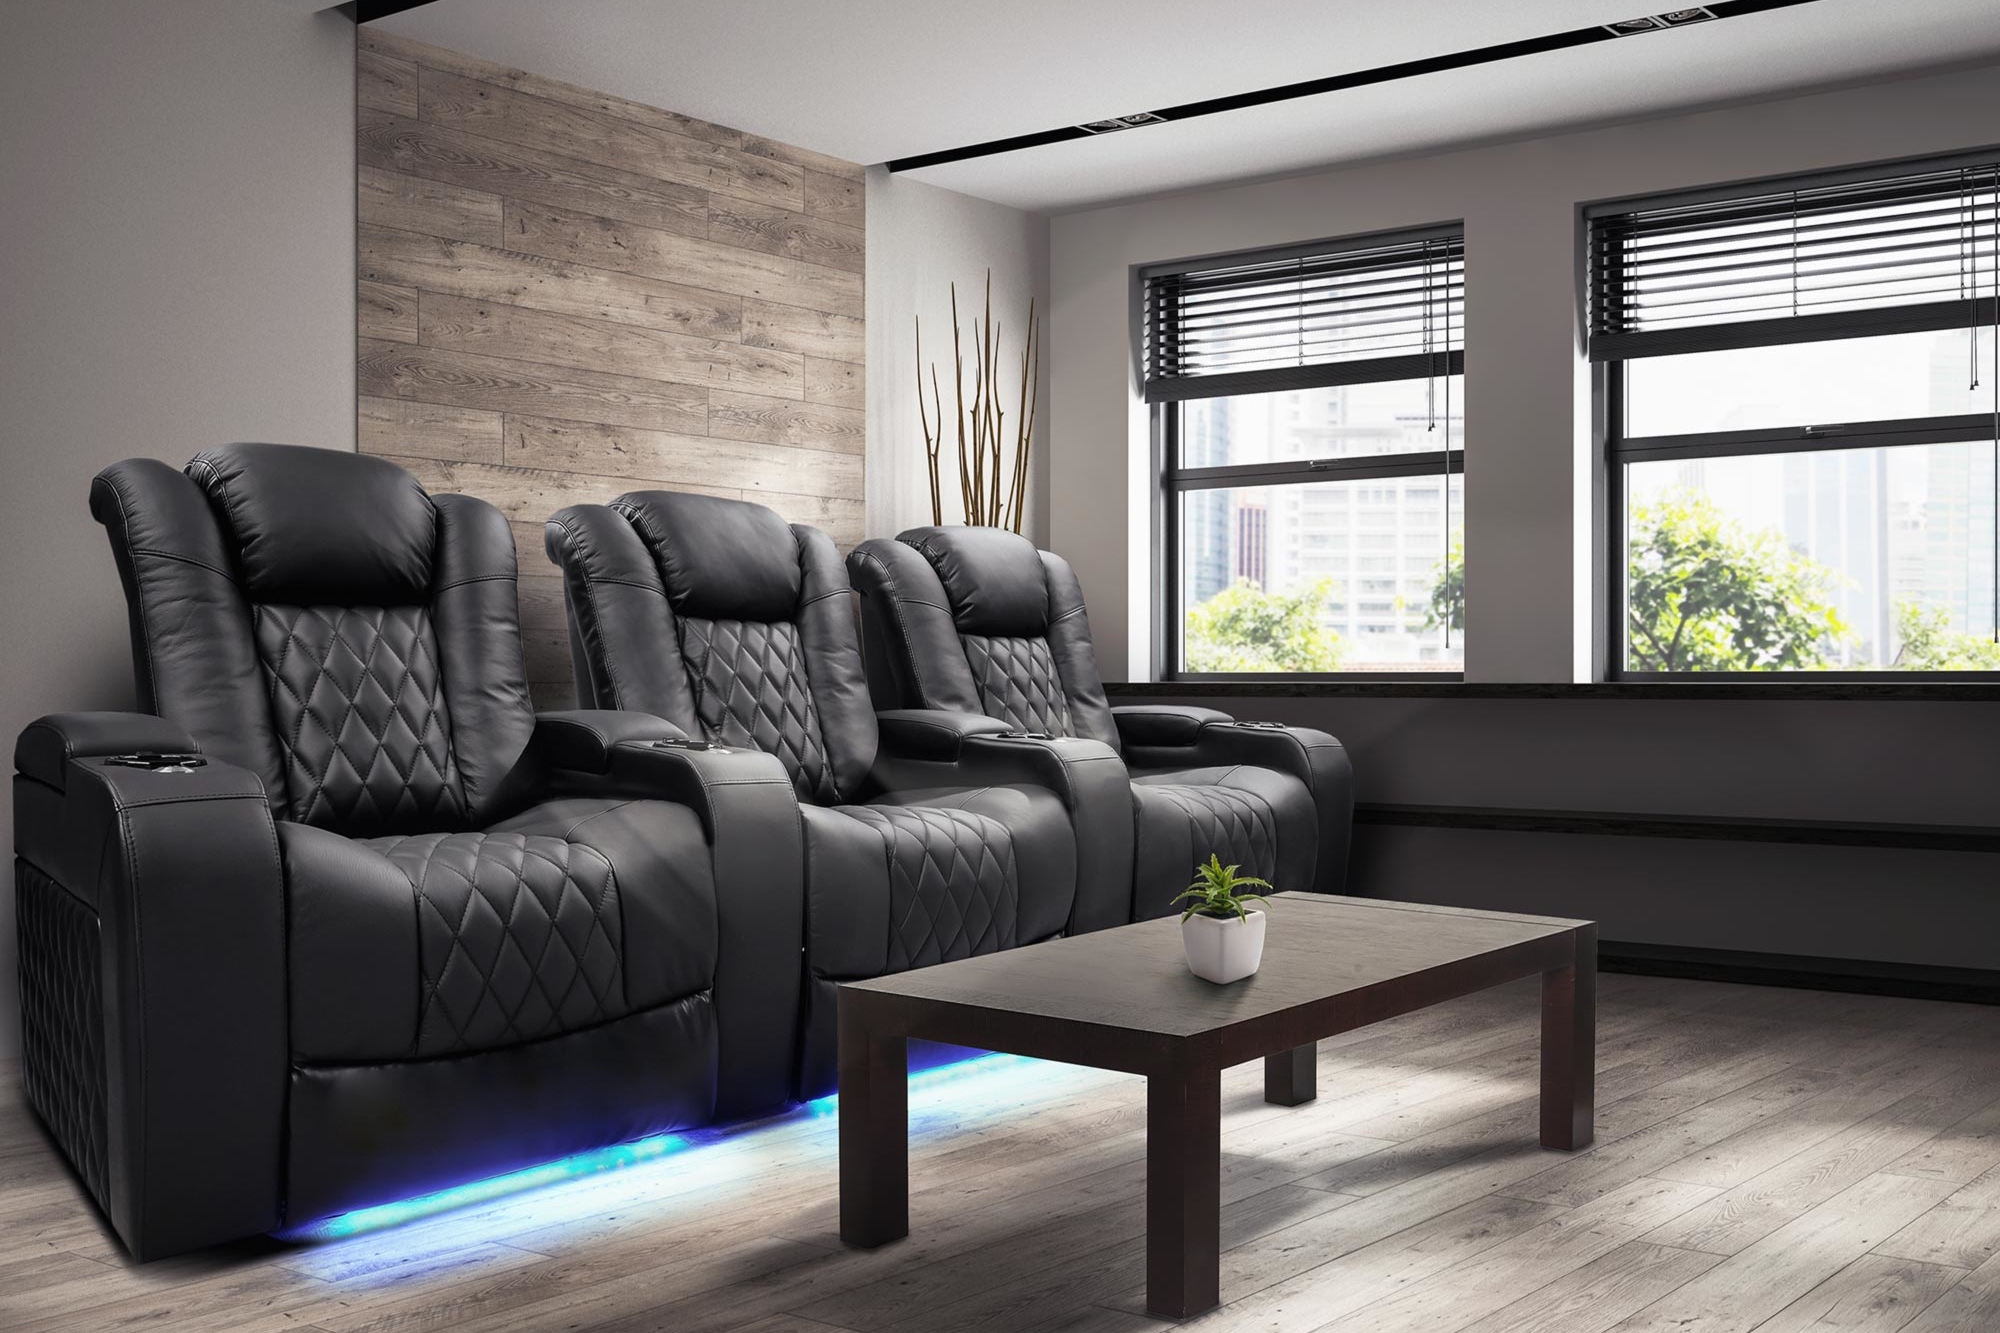 Bass-Equipped Home Theater Recliners Are All the Rage